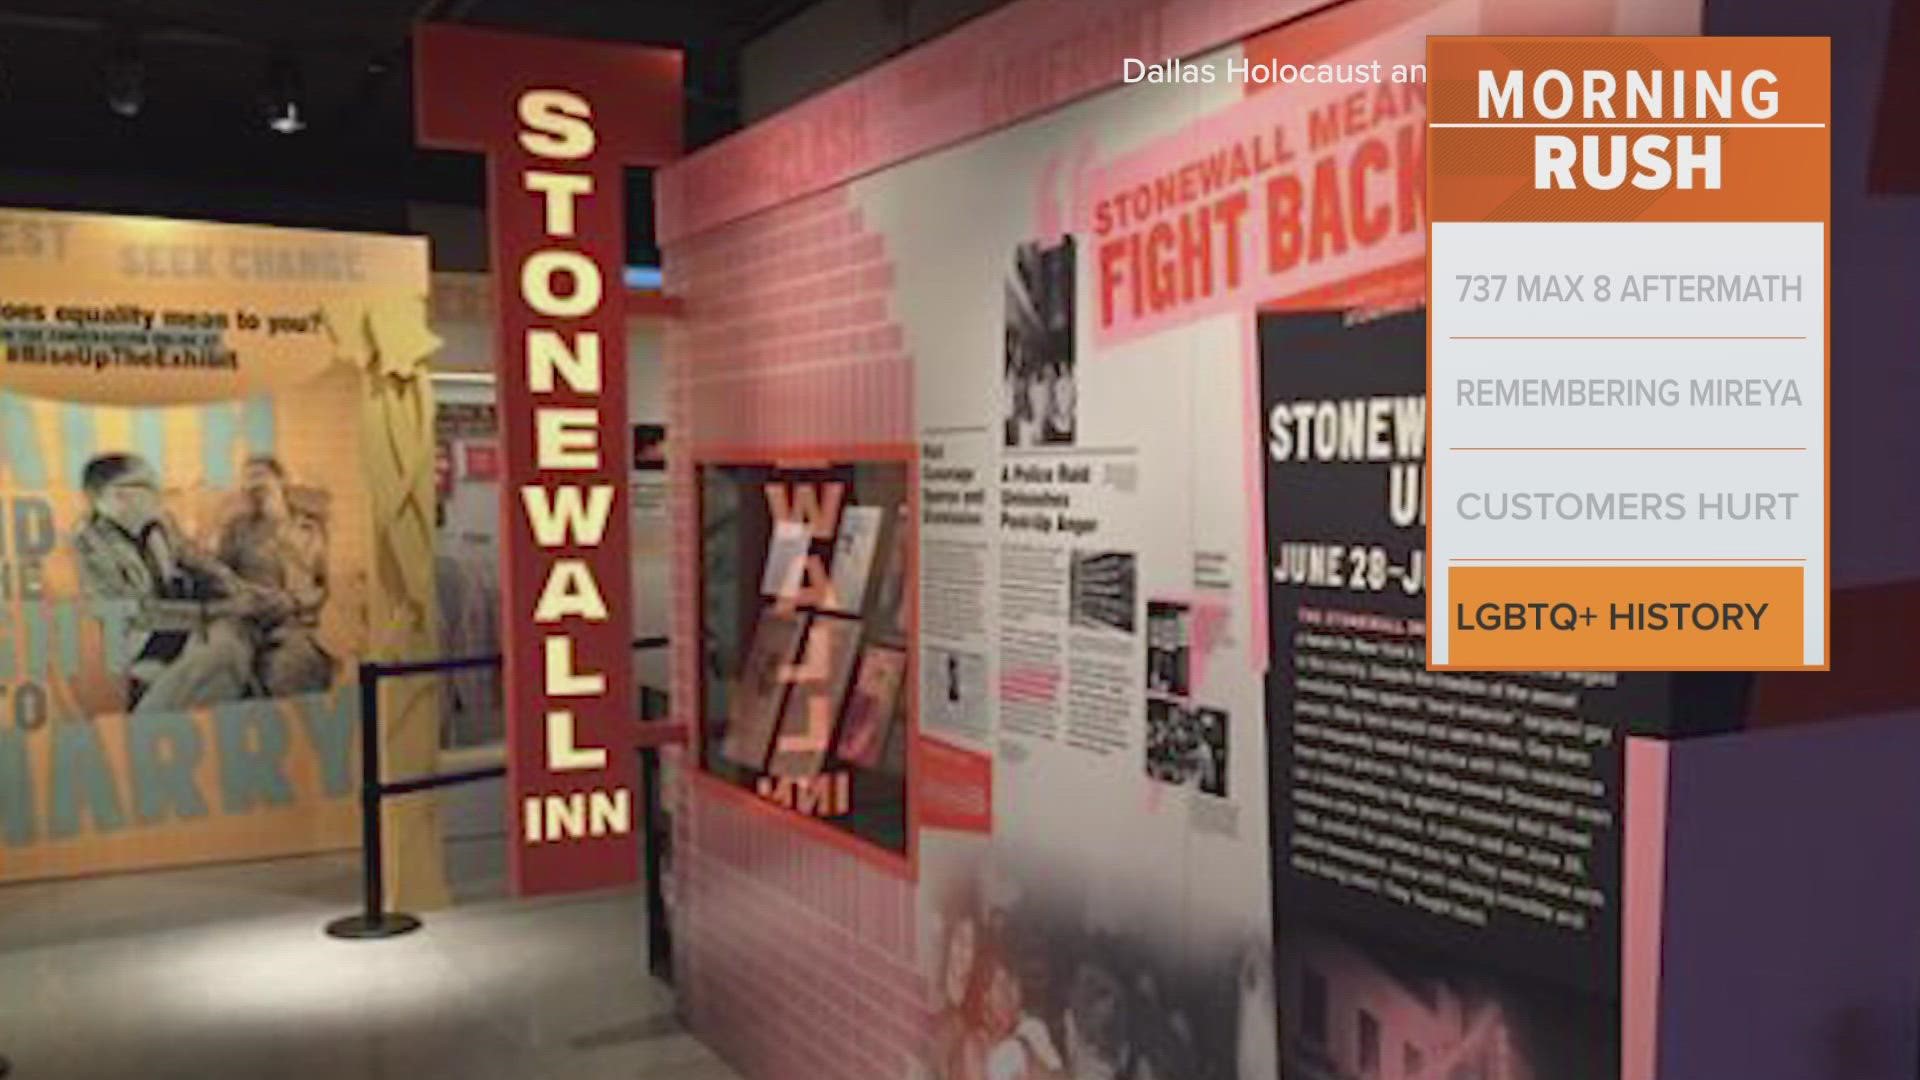 The exhibition highlights the 50th anniversary of the Stonewall riots in New York.